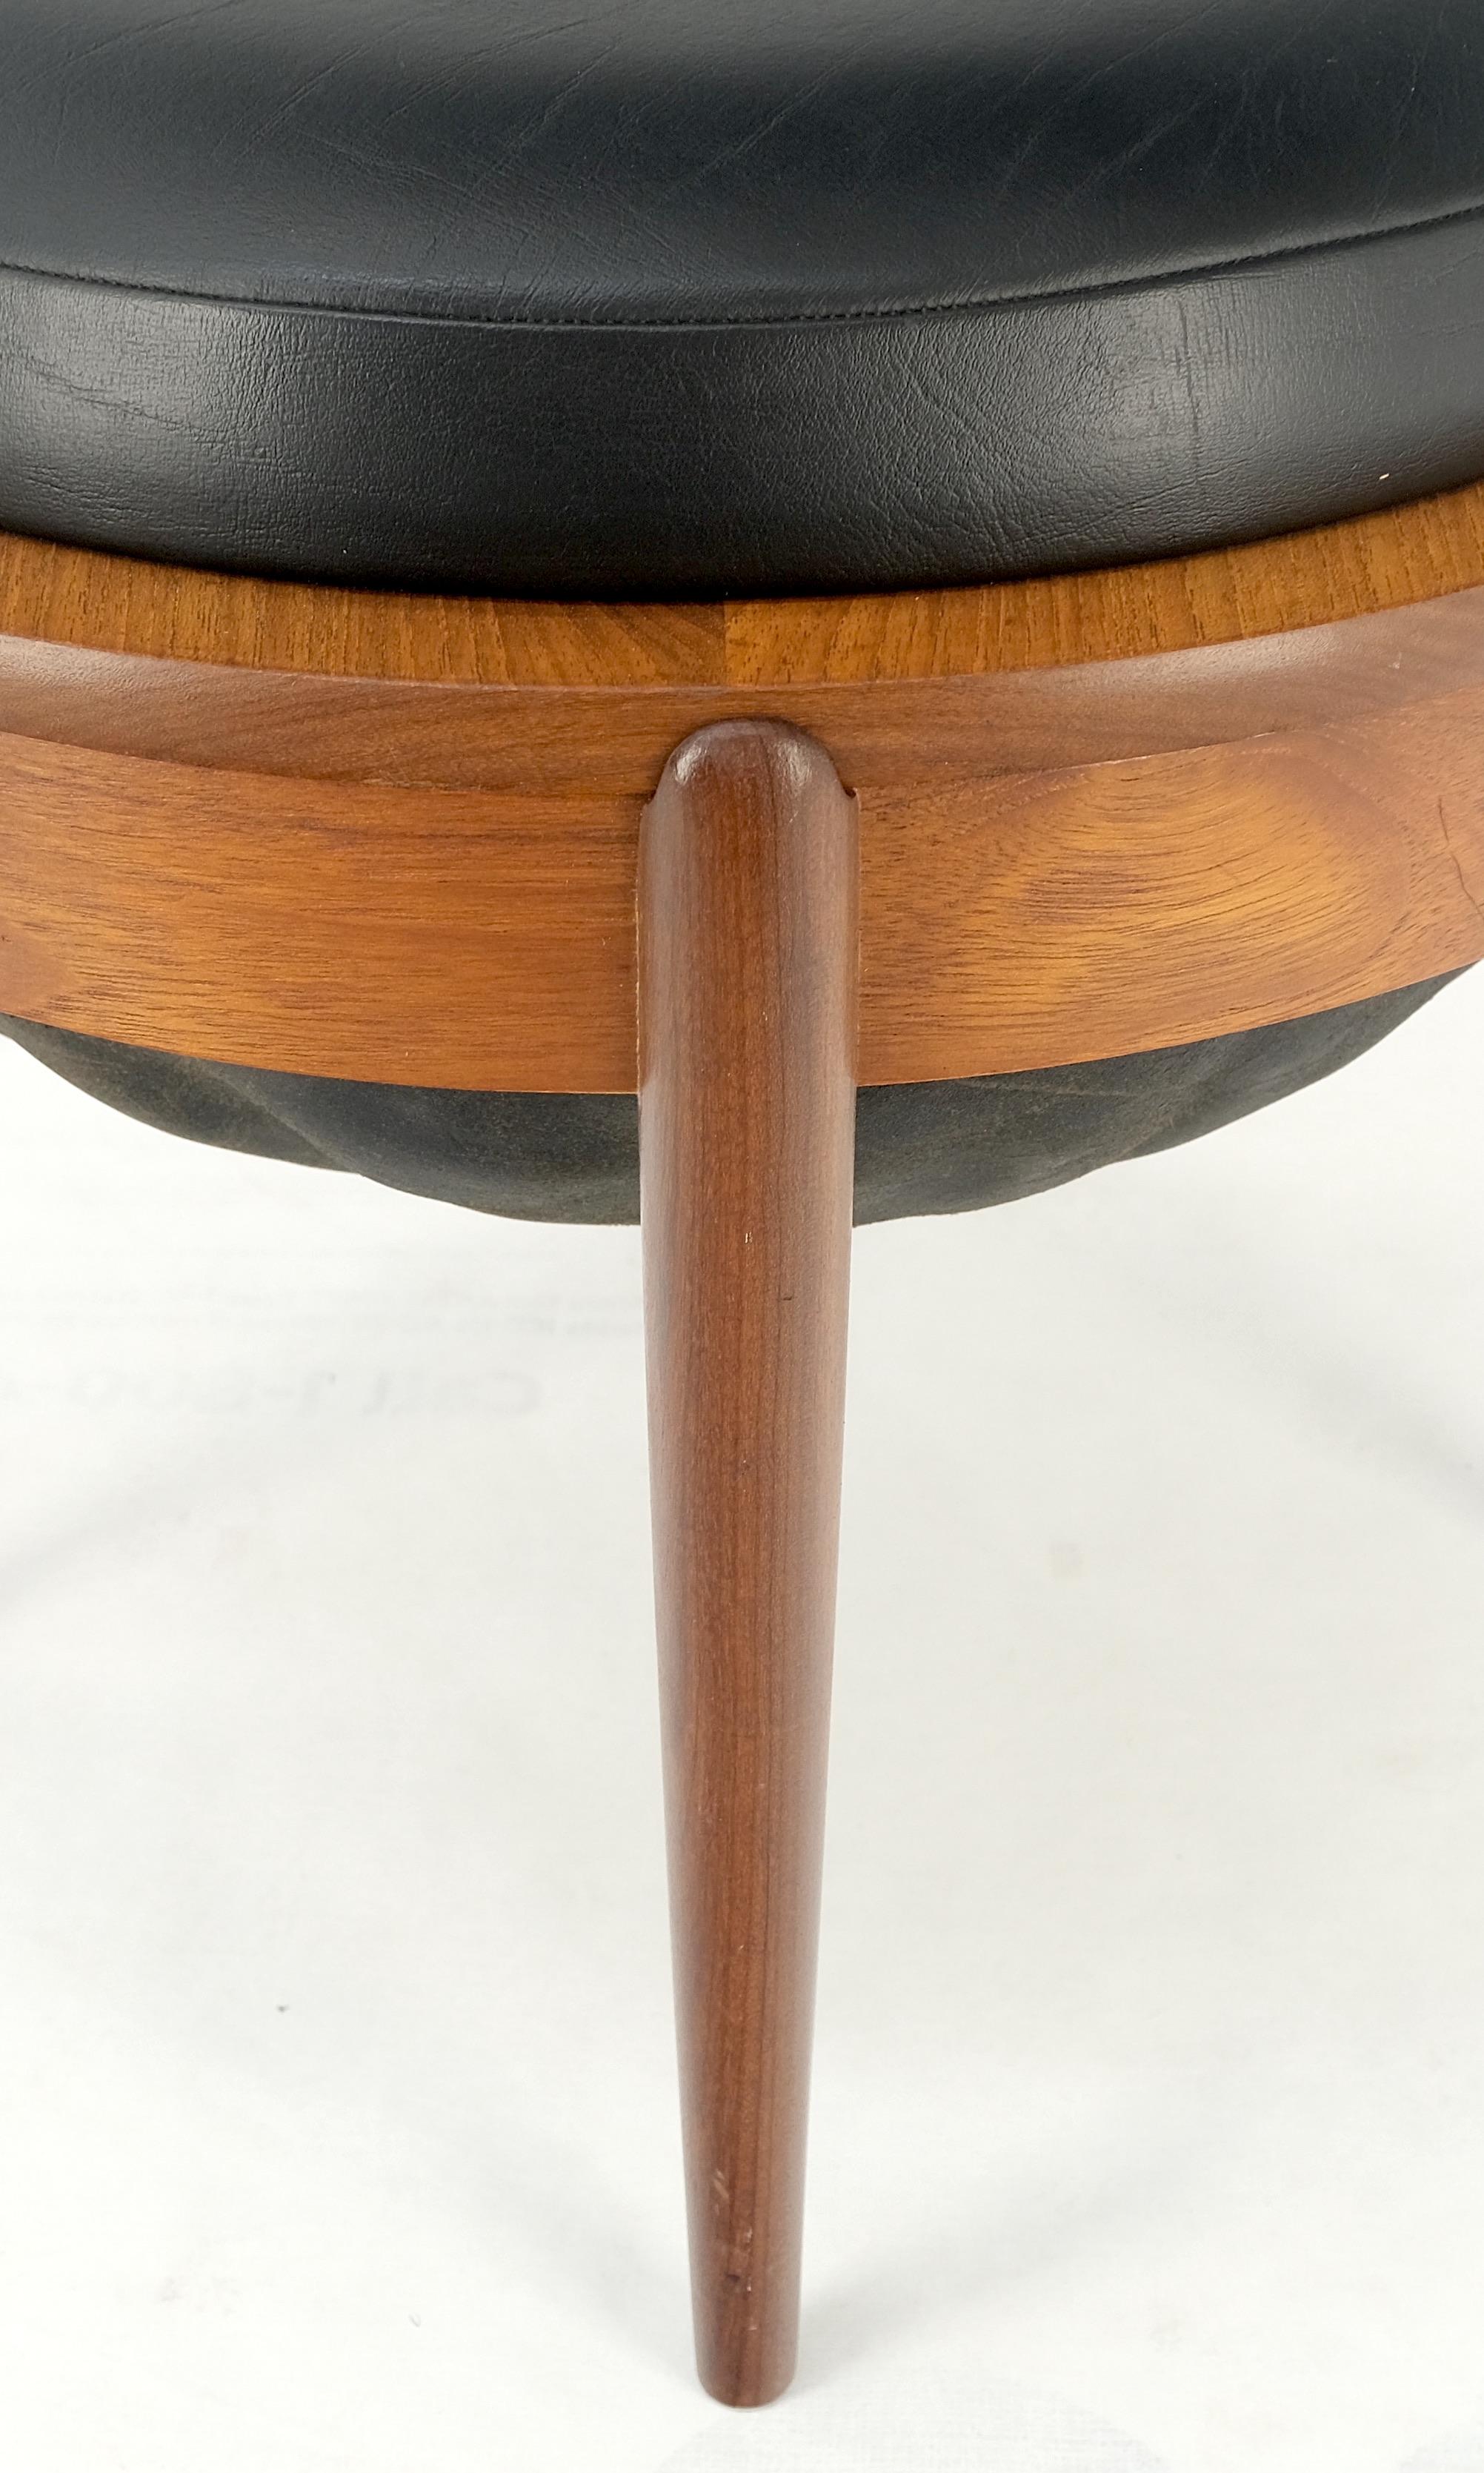 Leather Danish Mid-Century Modern Teak Sewing Stand Table Bench Flip Top by Hansen Mint! For Sale